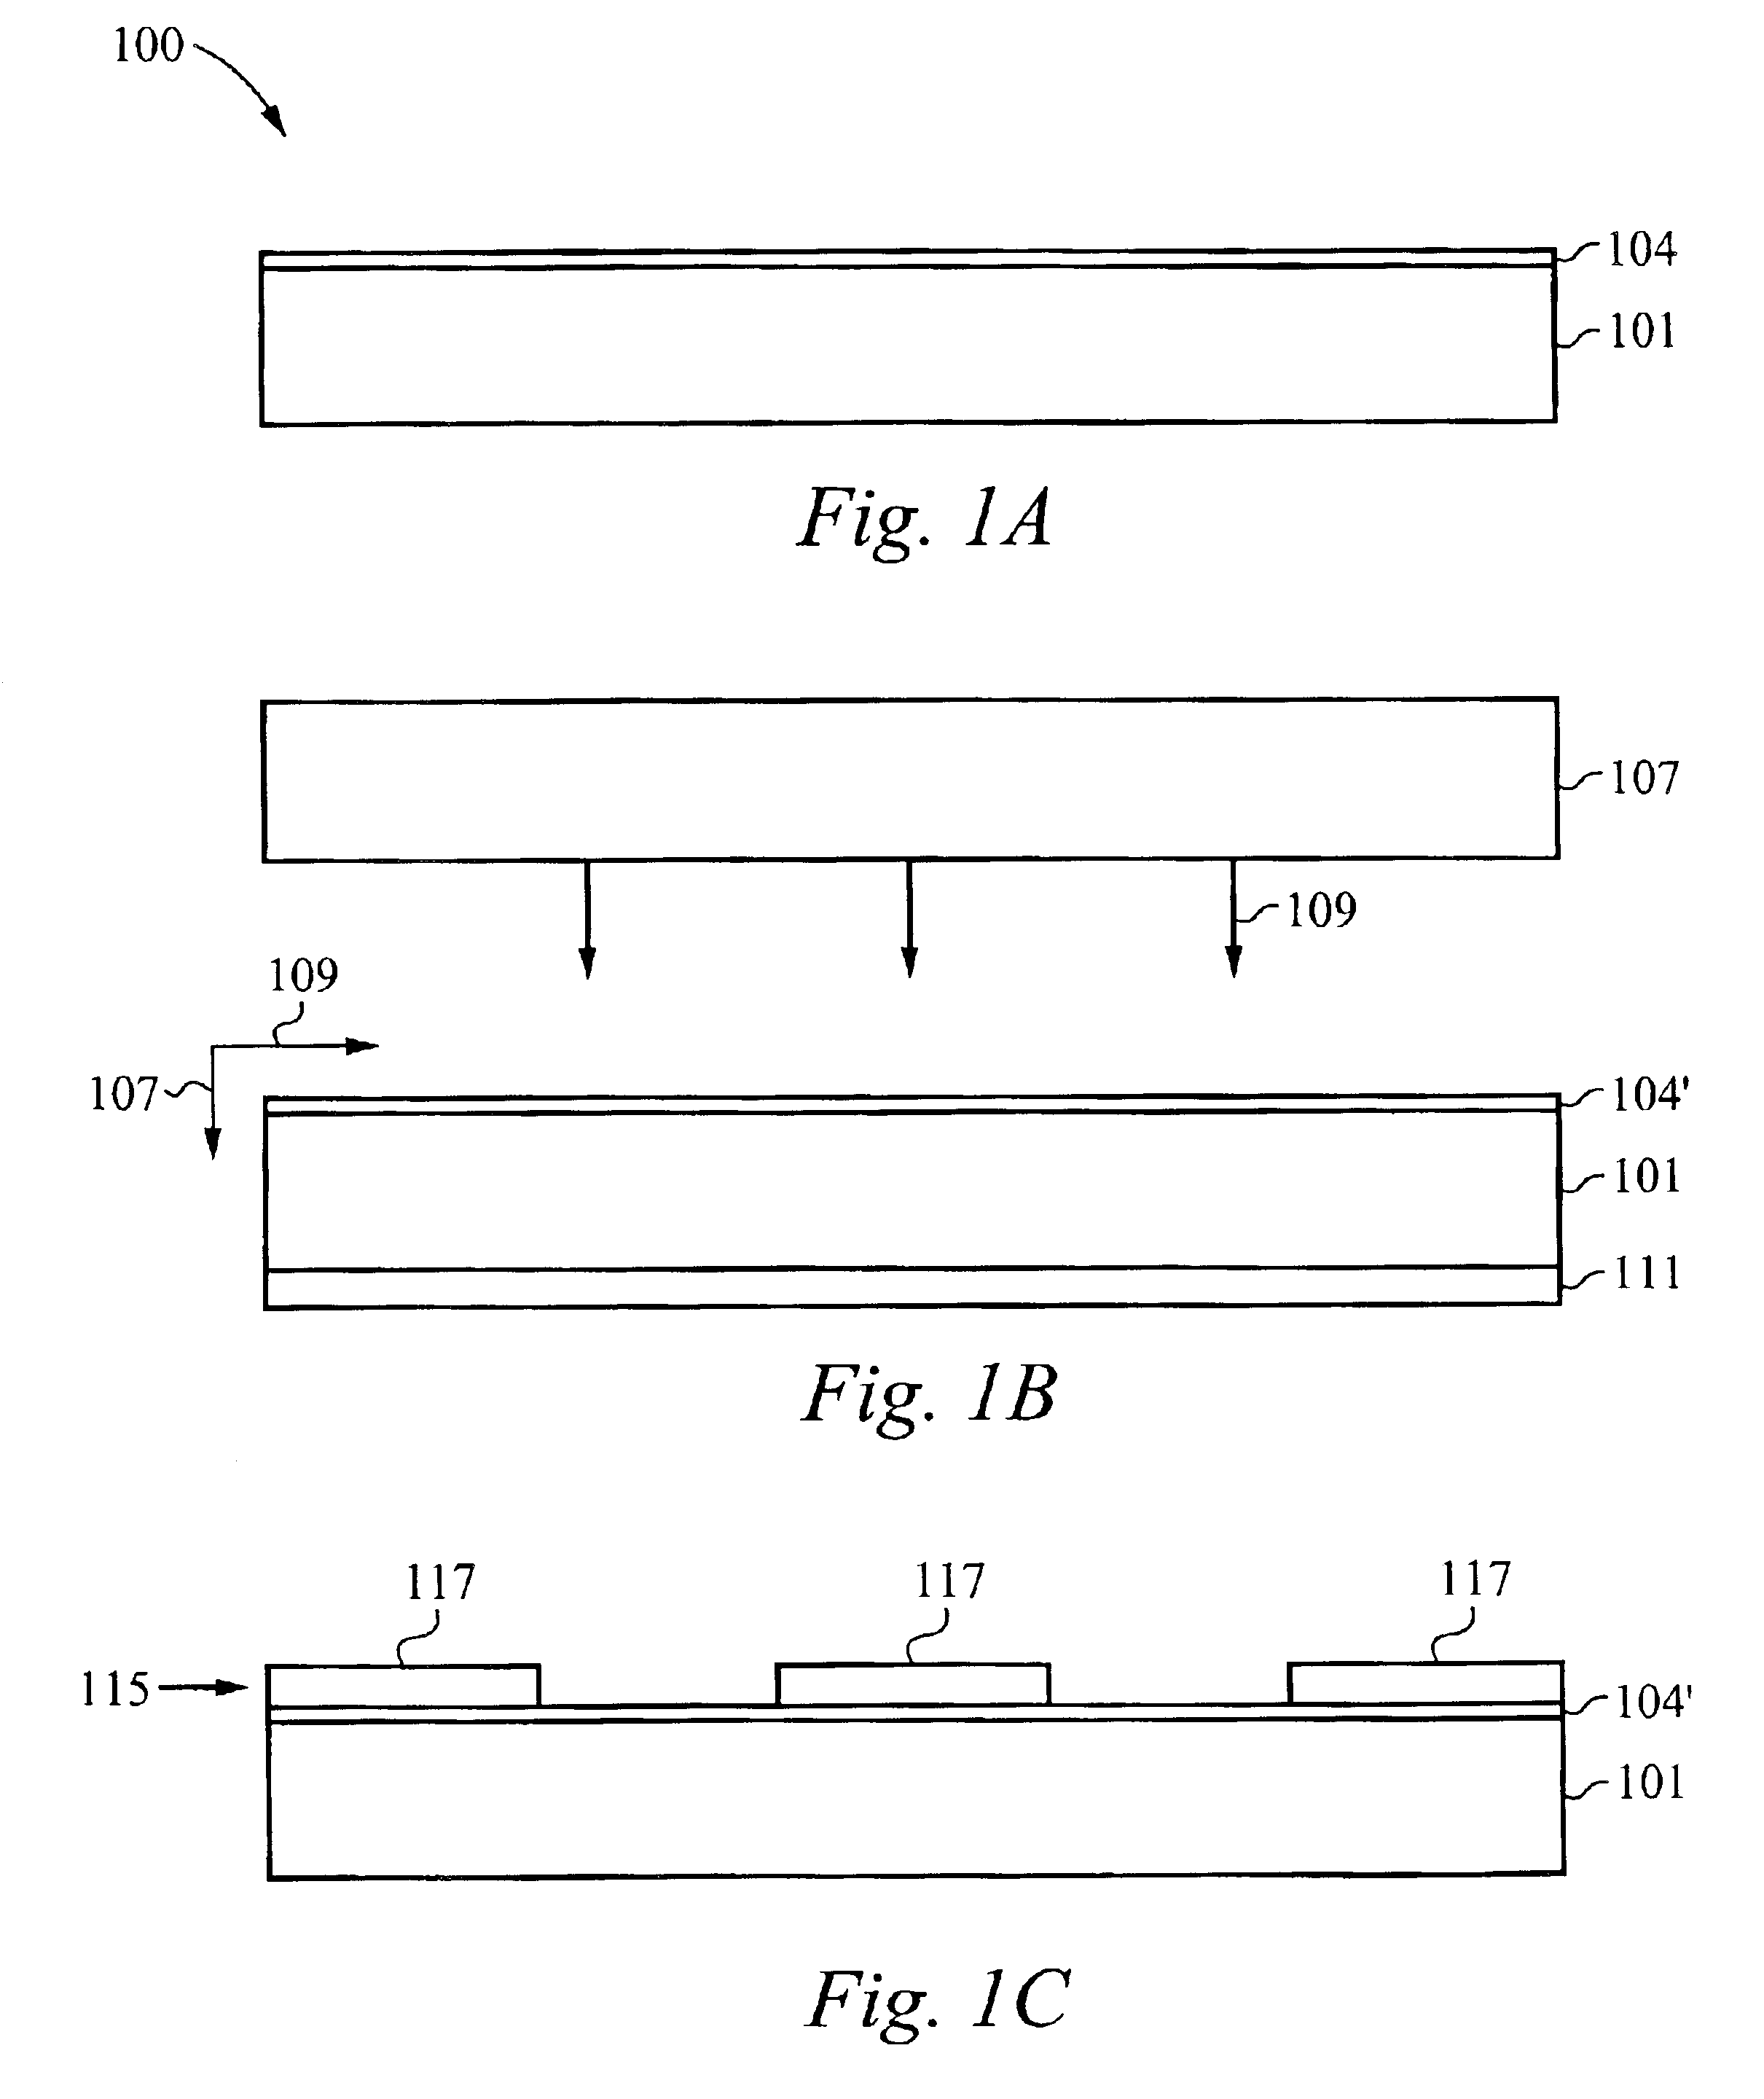 Interface layer for the fabrication of electronic devices